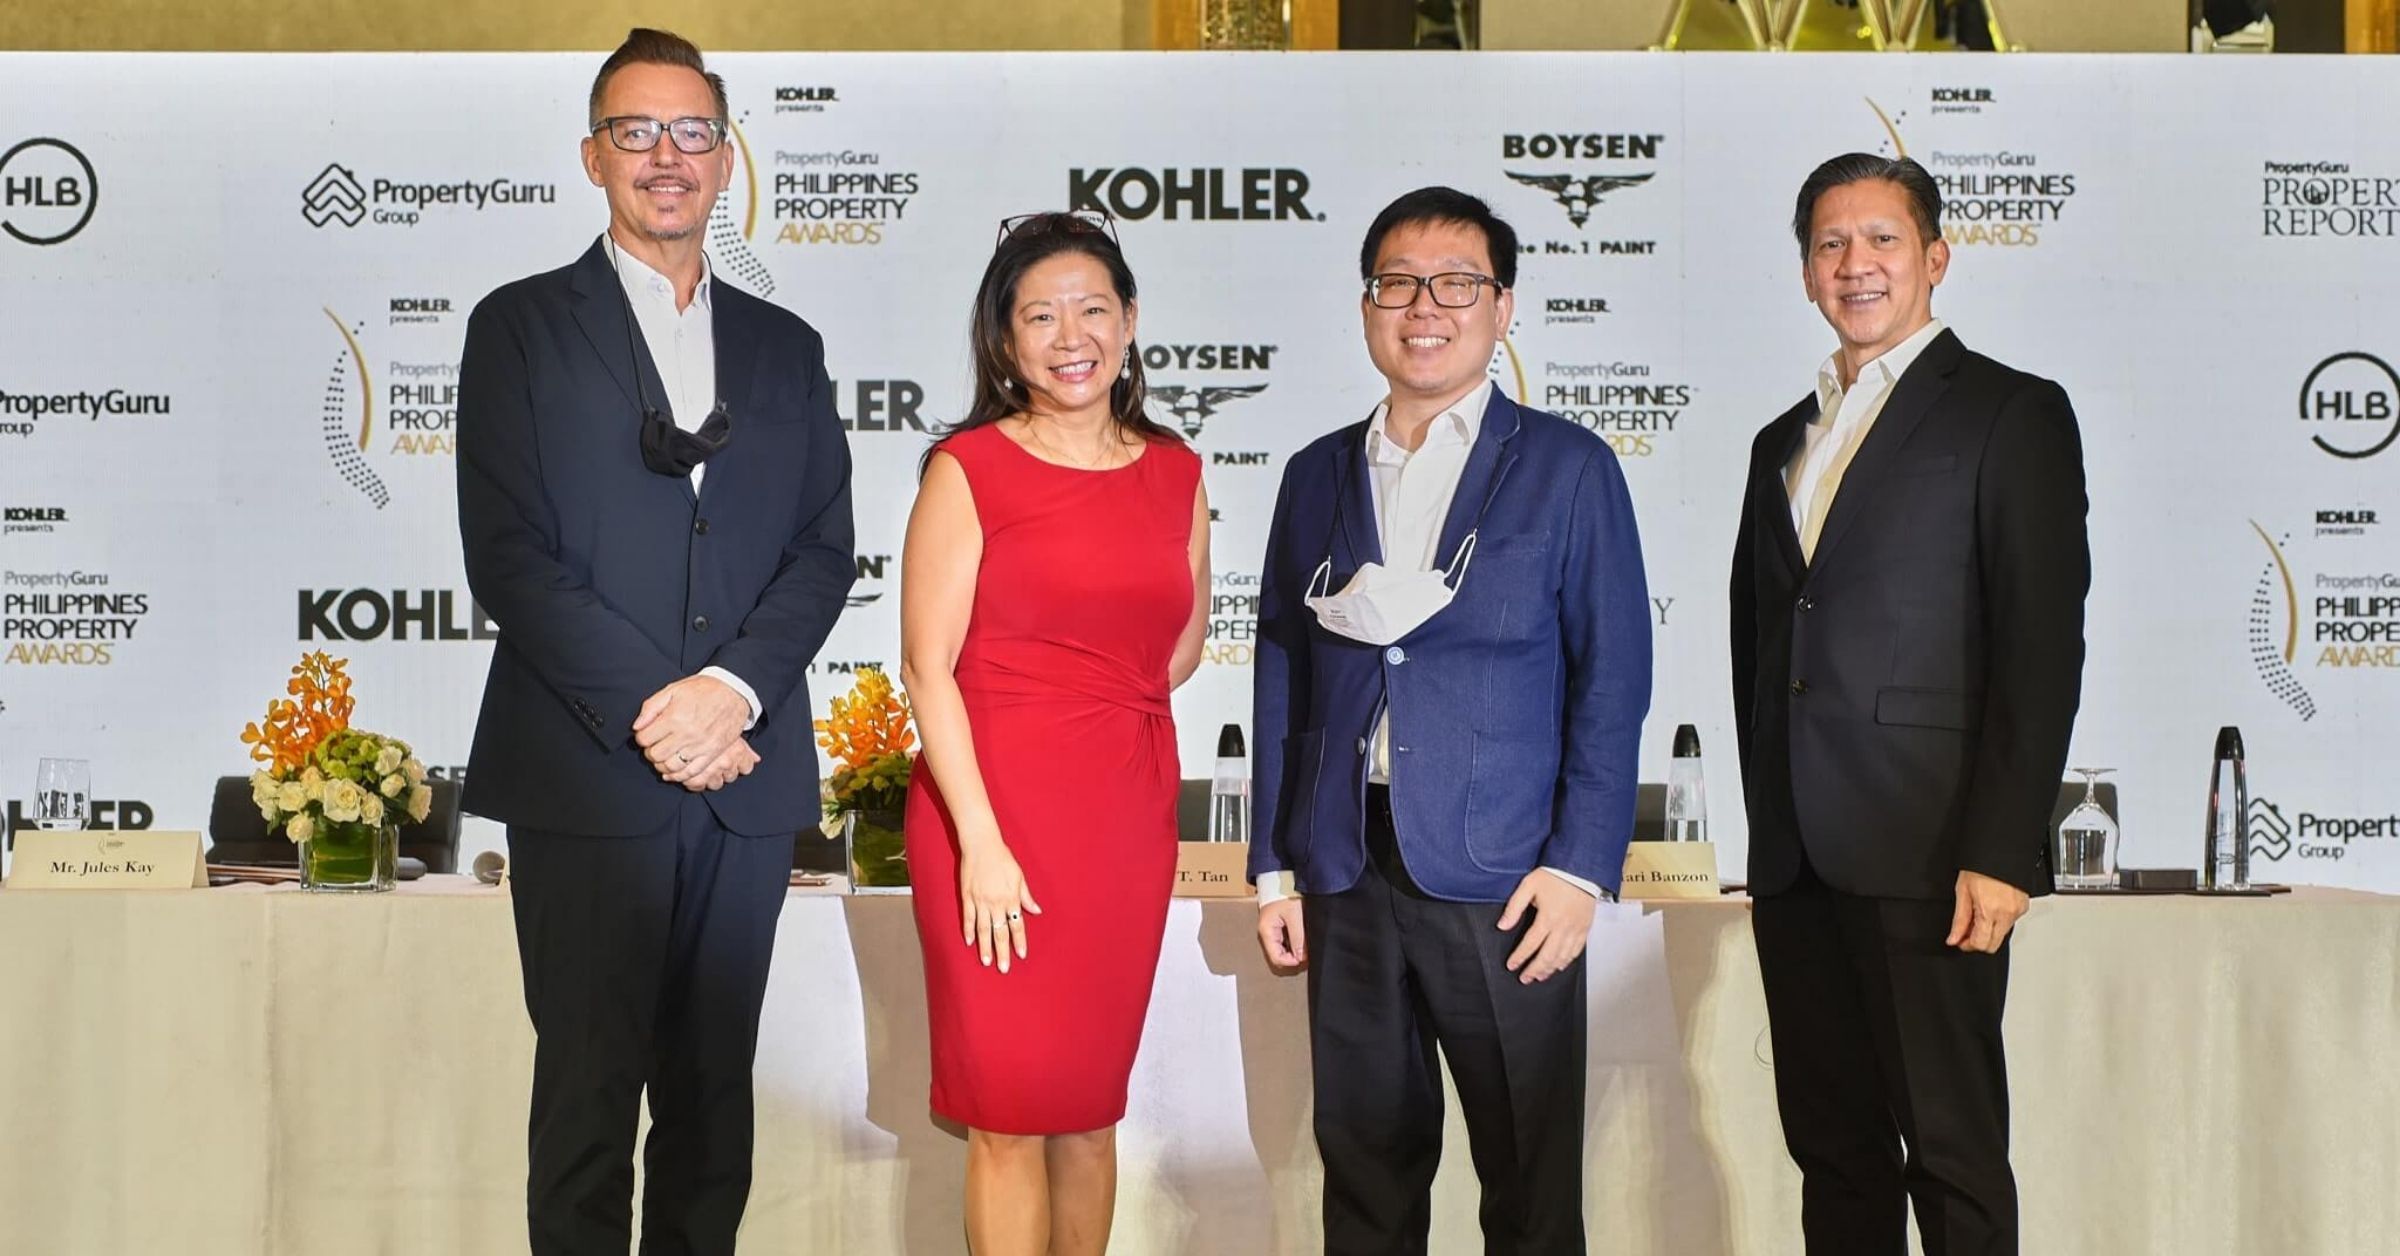 10th PropertyGuru Philippines Property Awards program launches with resurgent optimism in real estate market